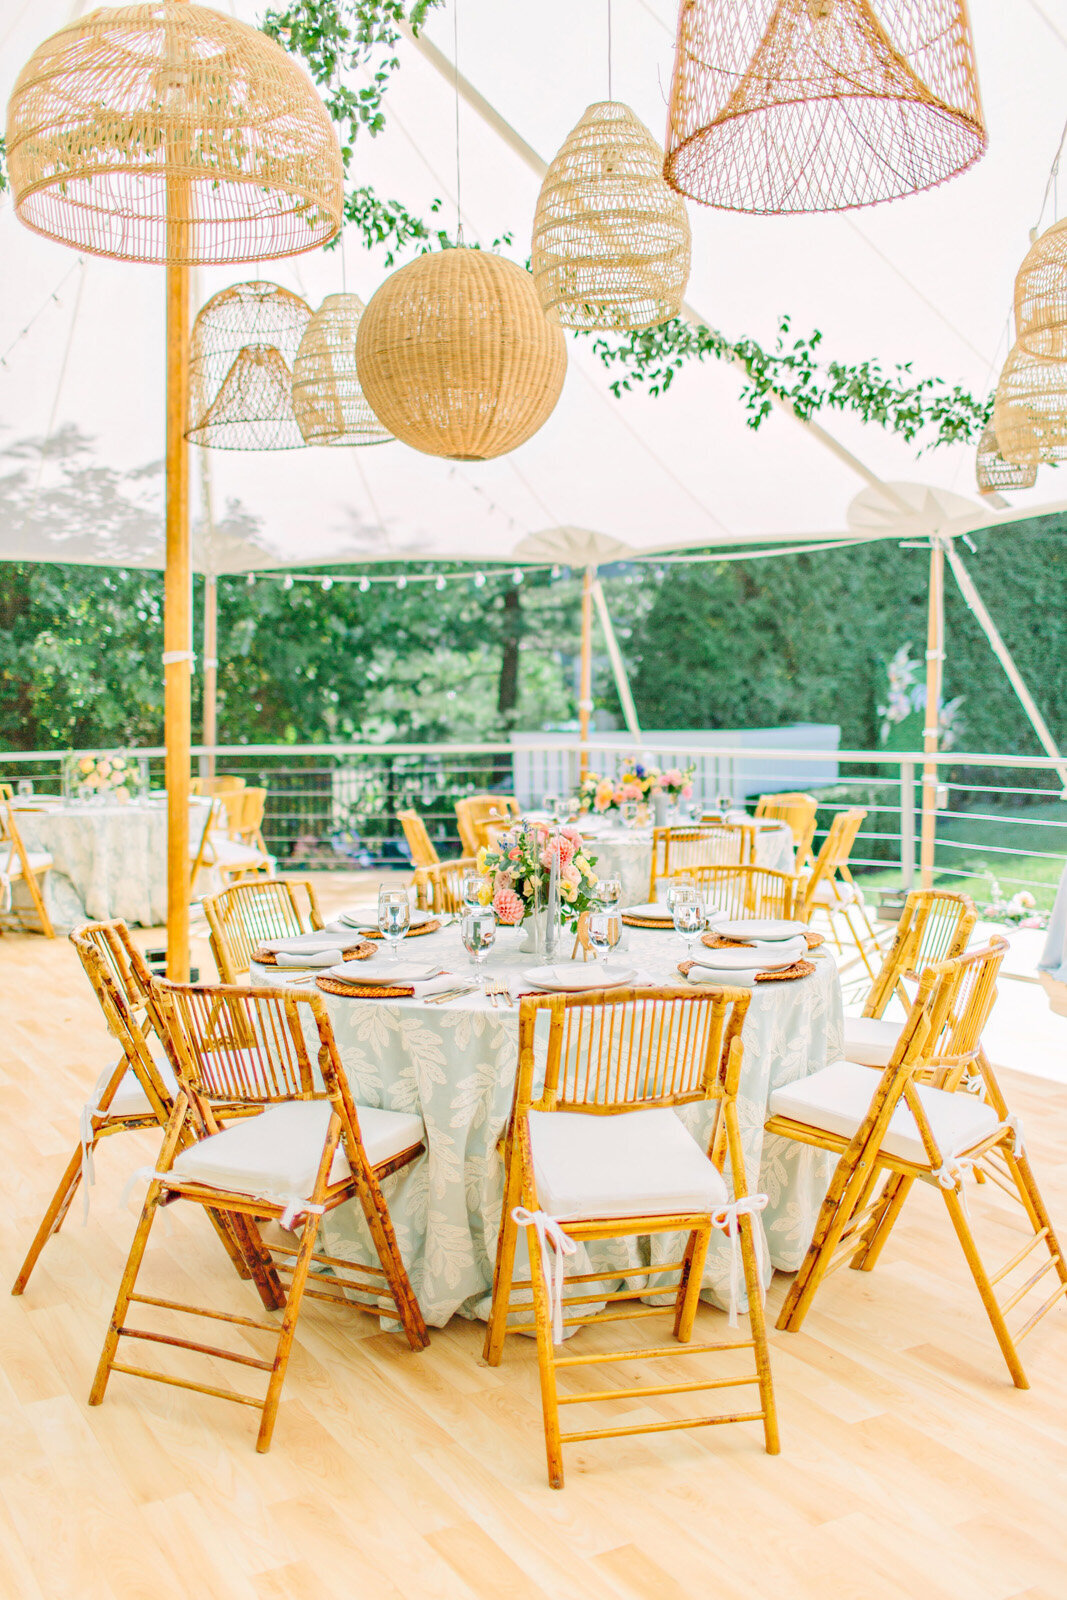 Kate-Murtaugh-Events-private-estate-wedding-planner-flowers-ceiling-lighting-decor-bamboo-chairs